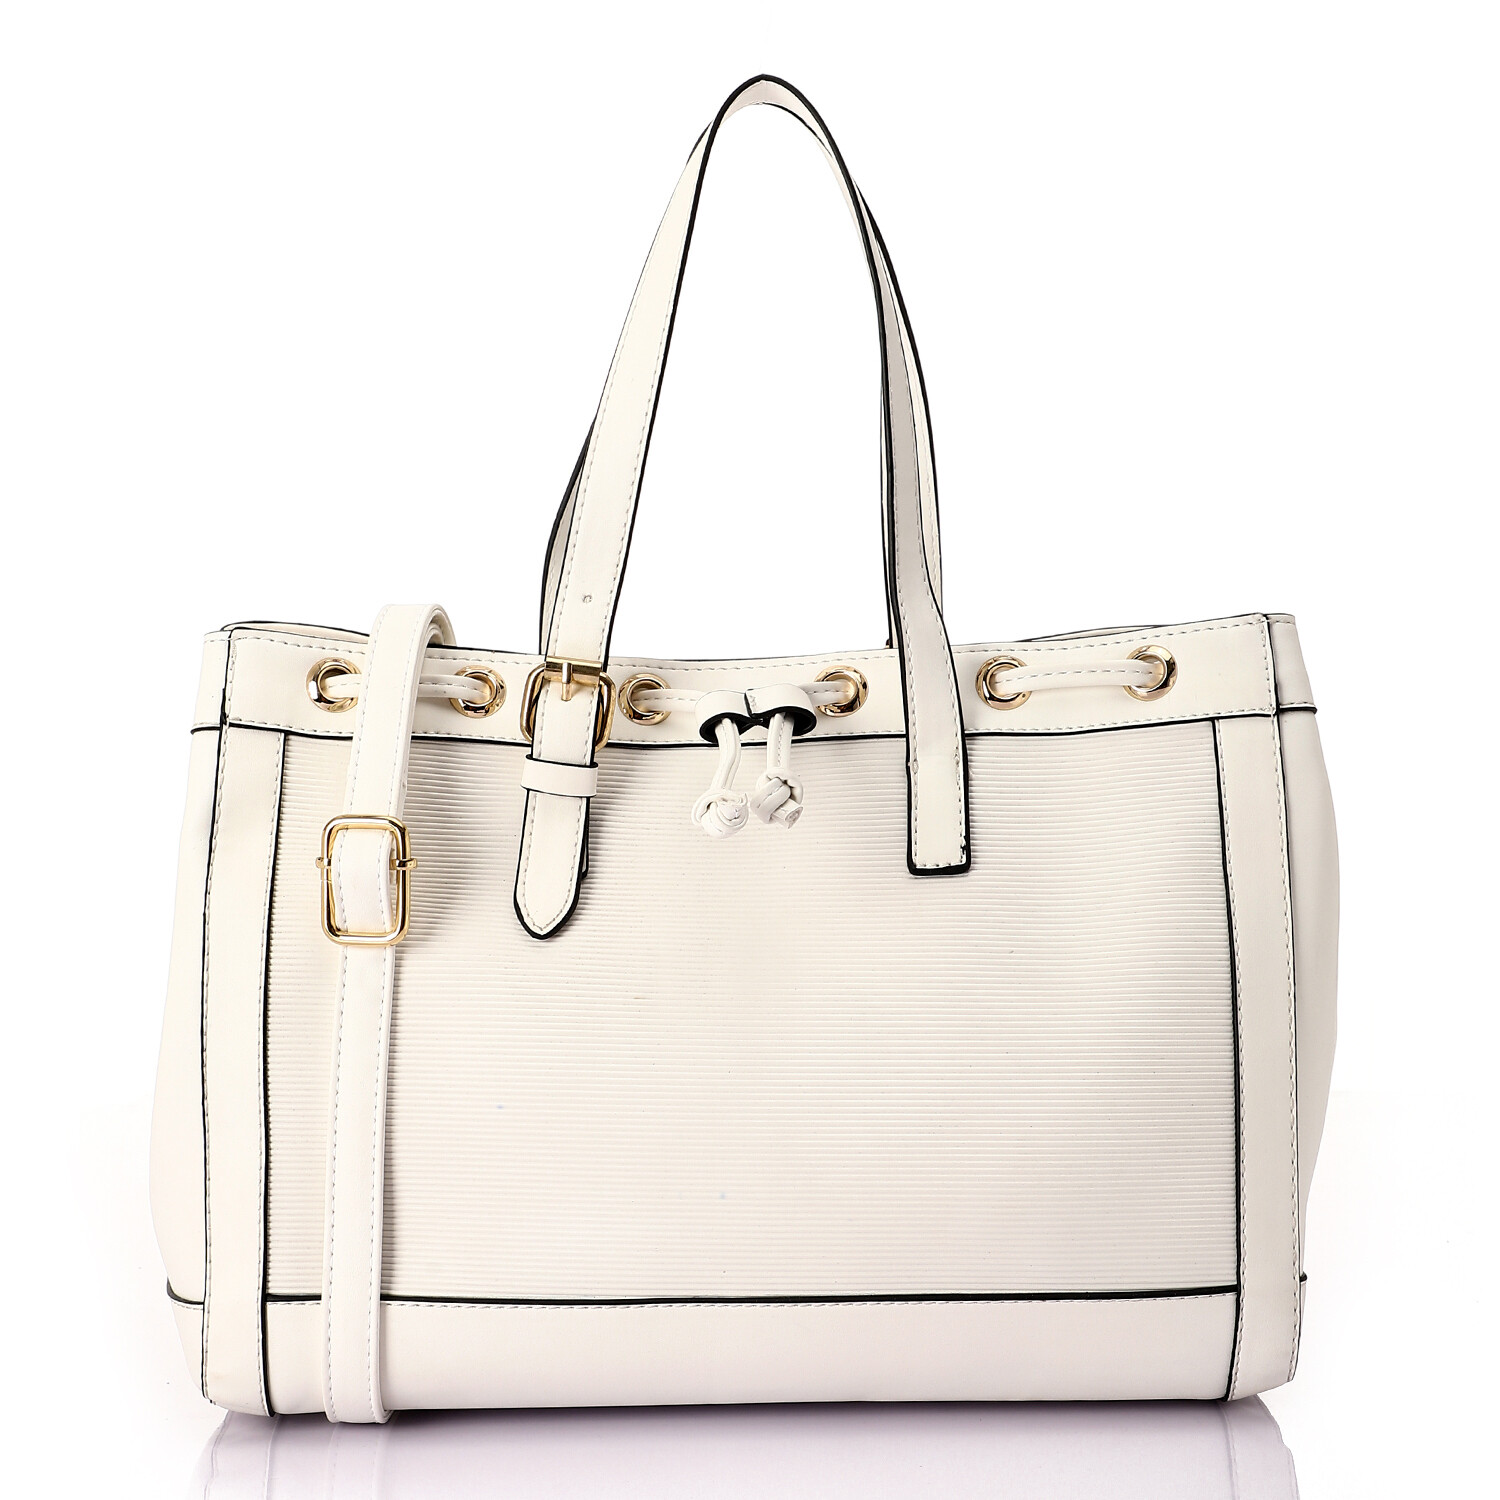 Front Ribbed Leather Handbag With Decorative Drawstring - White-4952